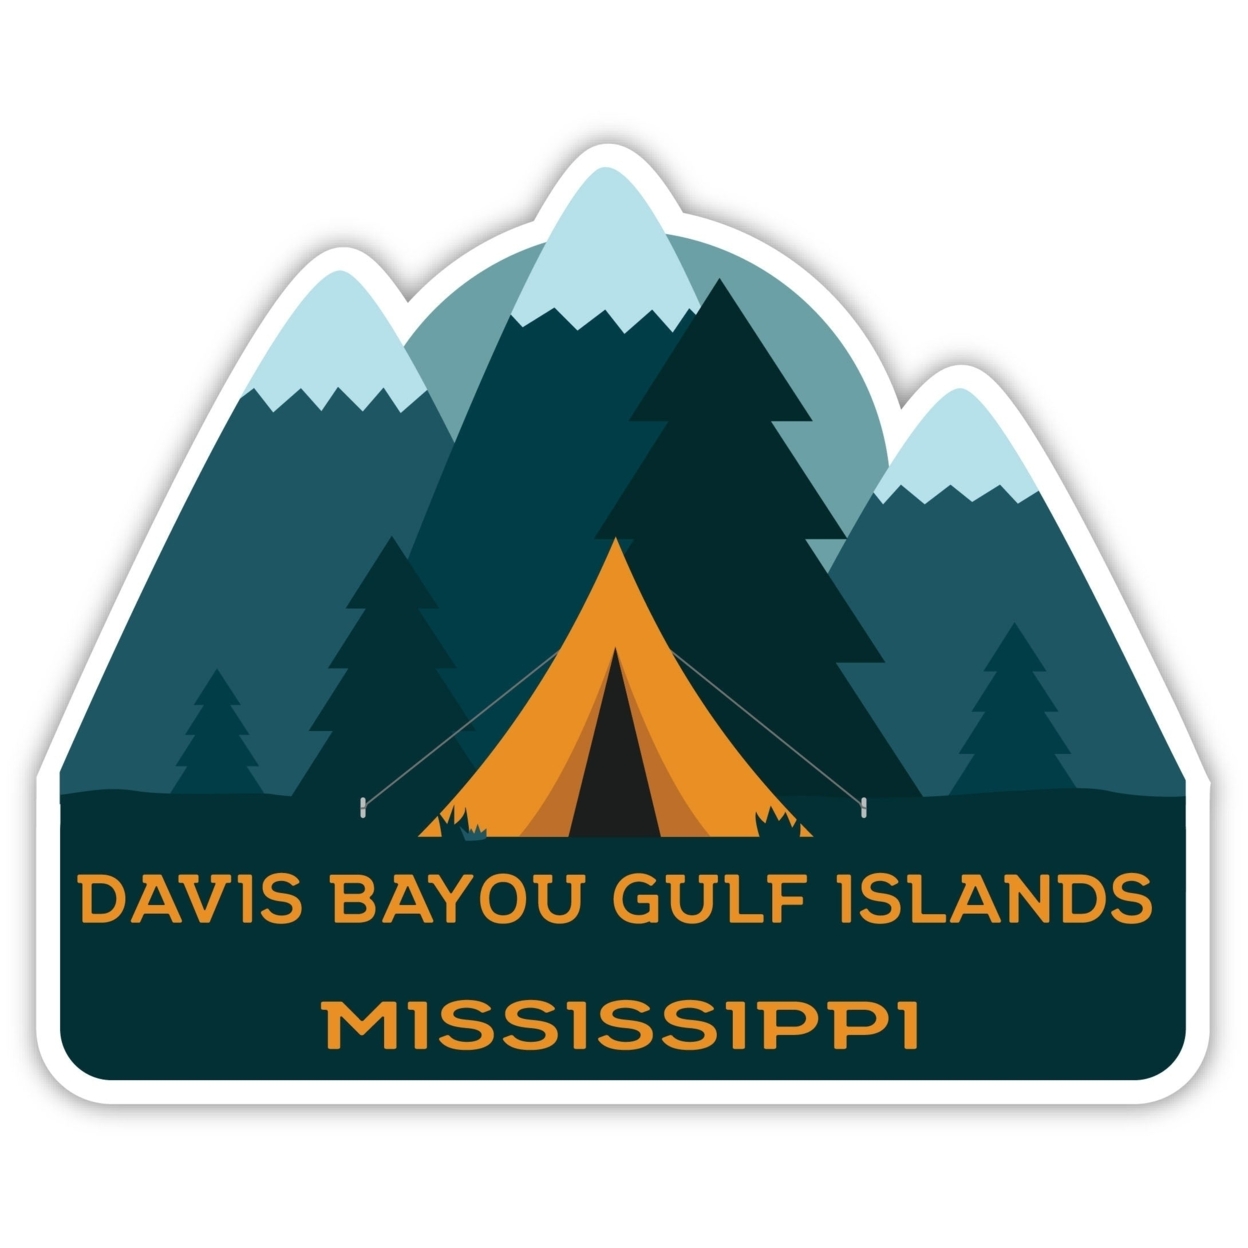 Davis Bayou Gulf Islands Mississippi Souvenir Decorative Stickers (Choose Theme And Size) - 4-Pack, 2-Inch, Tent